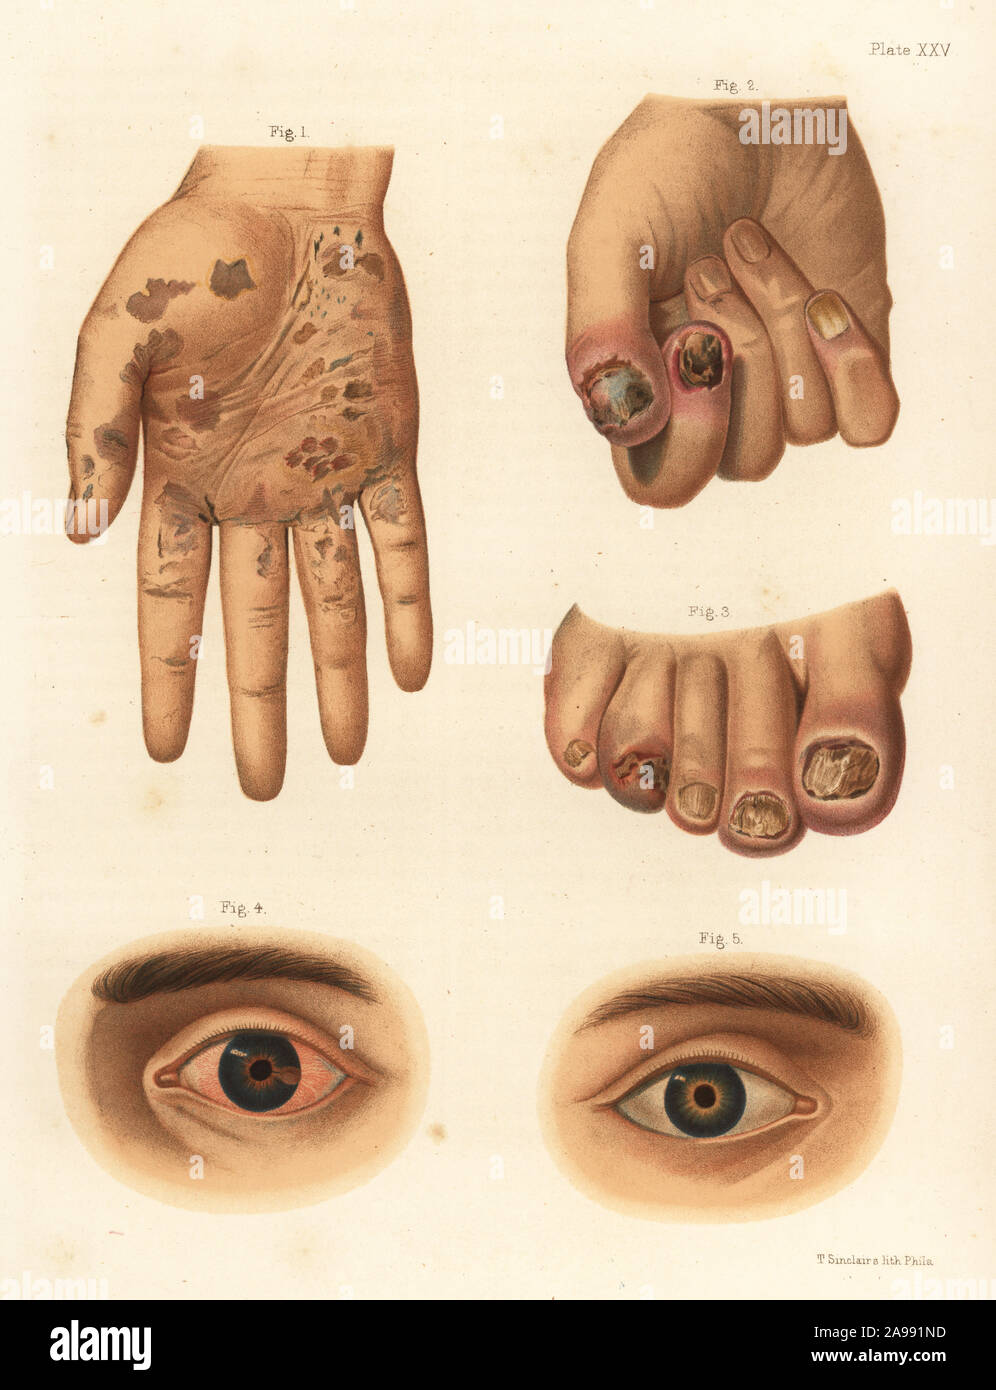 Secondary period syphilis symptoms on the body.  Squamous syphilide on the hand 1, onychia of the finger and thumb 2, onychia of the foot 3, iritis of the eye 4,5. Chromolithograph by T. Sinclaire from Freeman J. Bumstead’s Atlas of Venereal Diseases, Henry C. Lea, Philadelphia, 1868. First American edition of Auguste Cullerier’s Precis iconographique des maladies veneriennes. Stock Photo